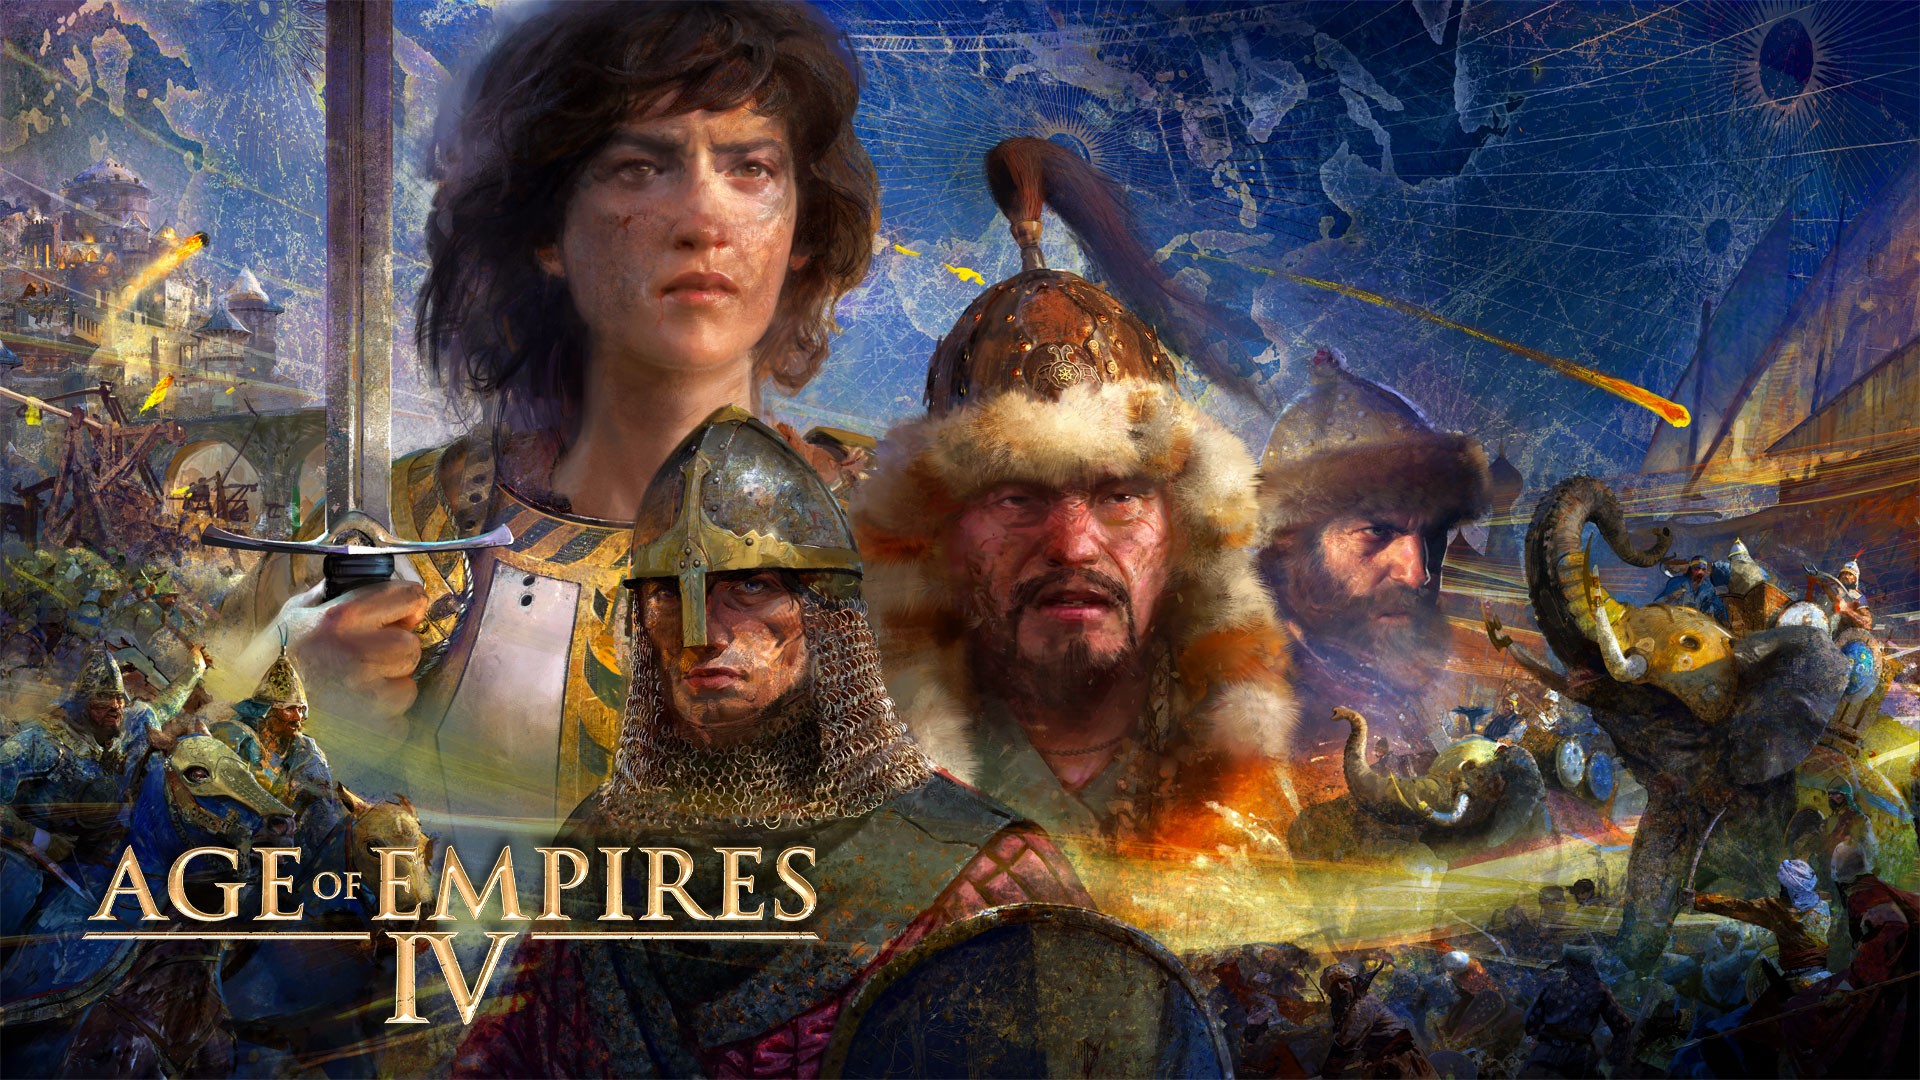 Video For Age of Empires IV Launching October 28 on PC with Xbox Game Pass, Available for Pre-order Now